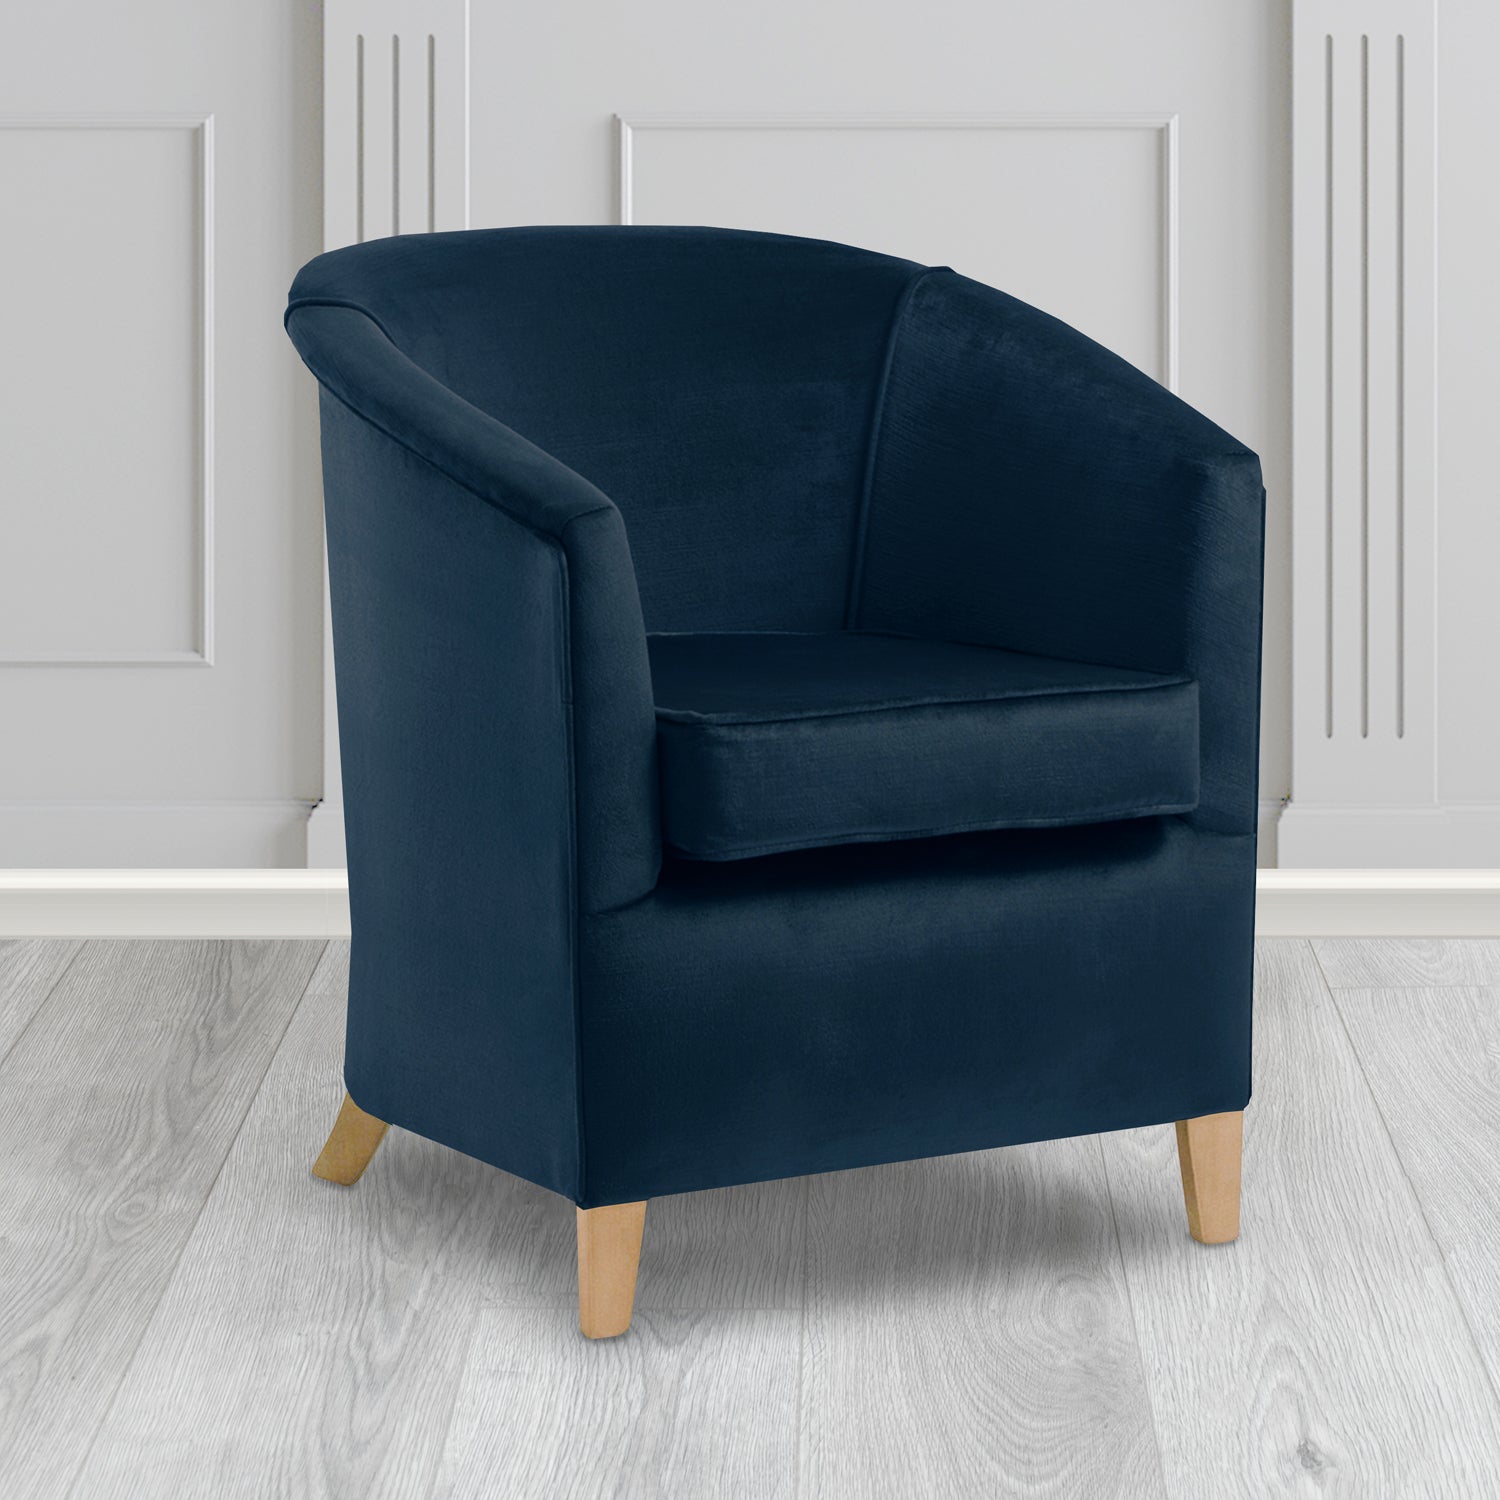 Jasmine Tub Chair in Noble 192 Ink Crib 5 Velvet Fabric - Water Resistant - The Tub Chair Shop